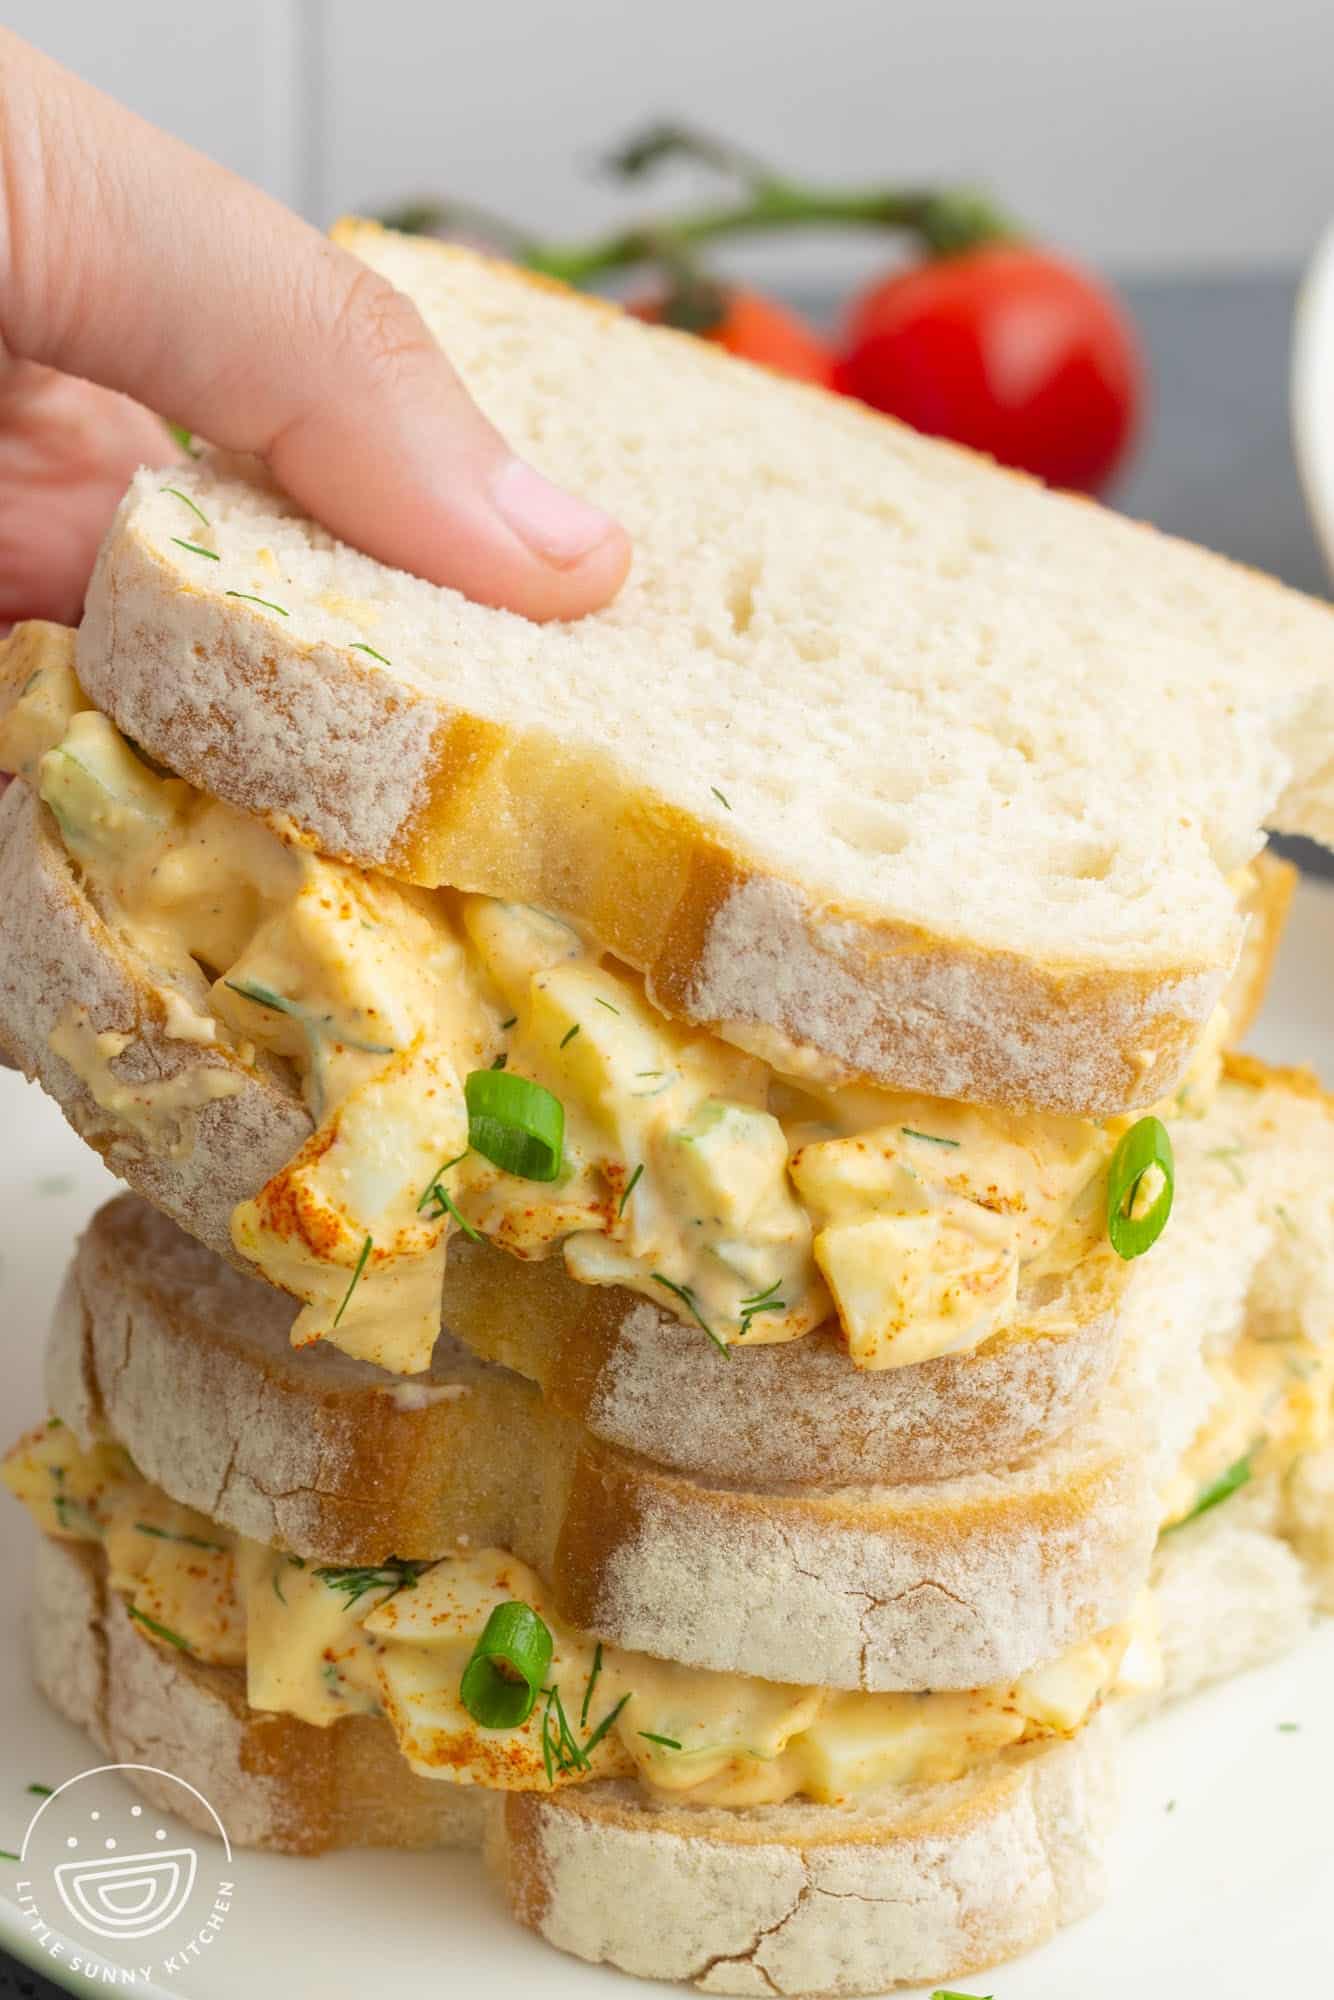 Two egg salad sandwiches on country white bread, stacked on top of one another.